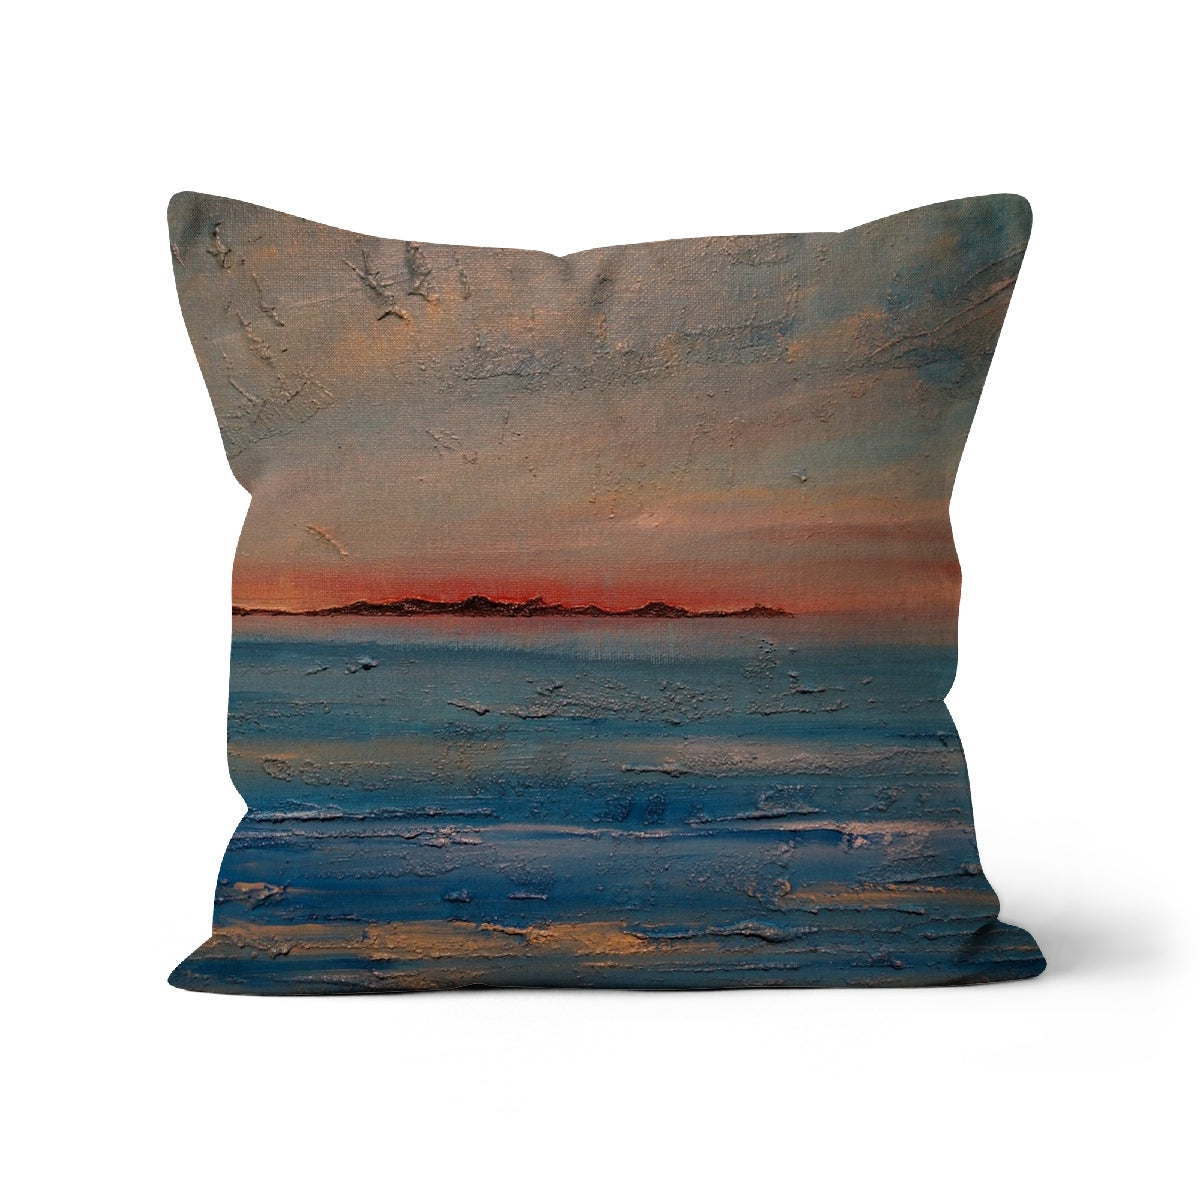 Gigha Sunset Art Gifts Cushion-Cushions-Hebridean Islands Art Gallery-Canvas-16"x16"-Paintings, Prints, Homeware, Art Gifts From Scotland By Scottish Artist Kevin Hunter